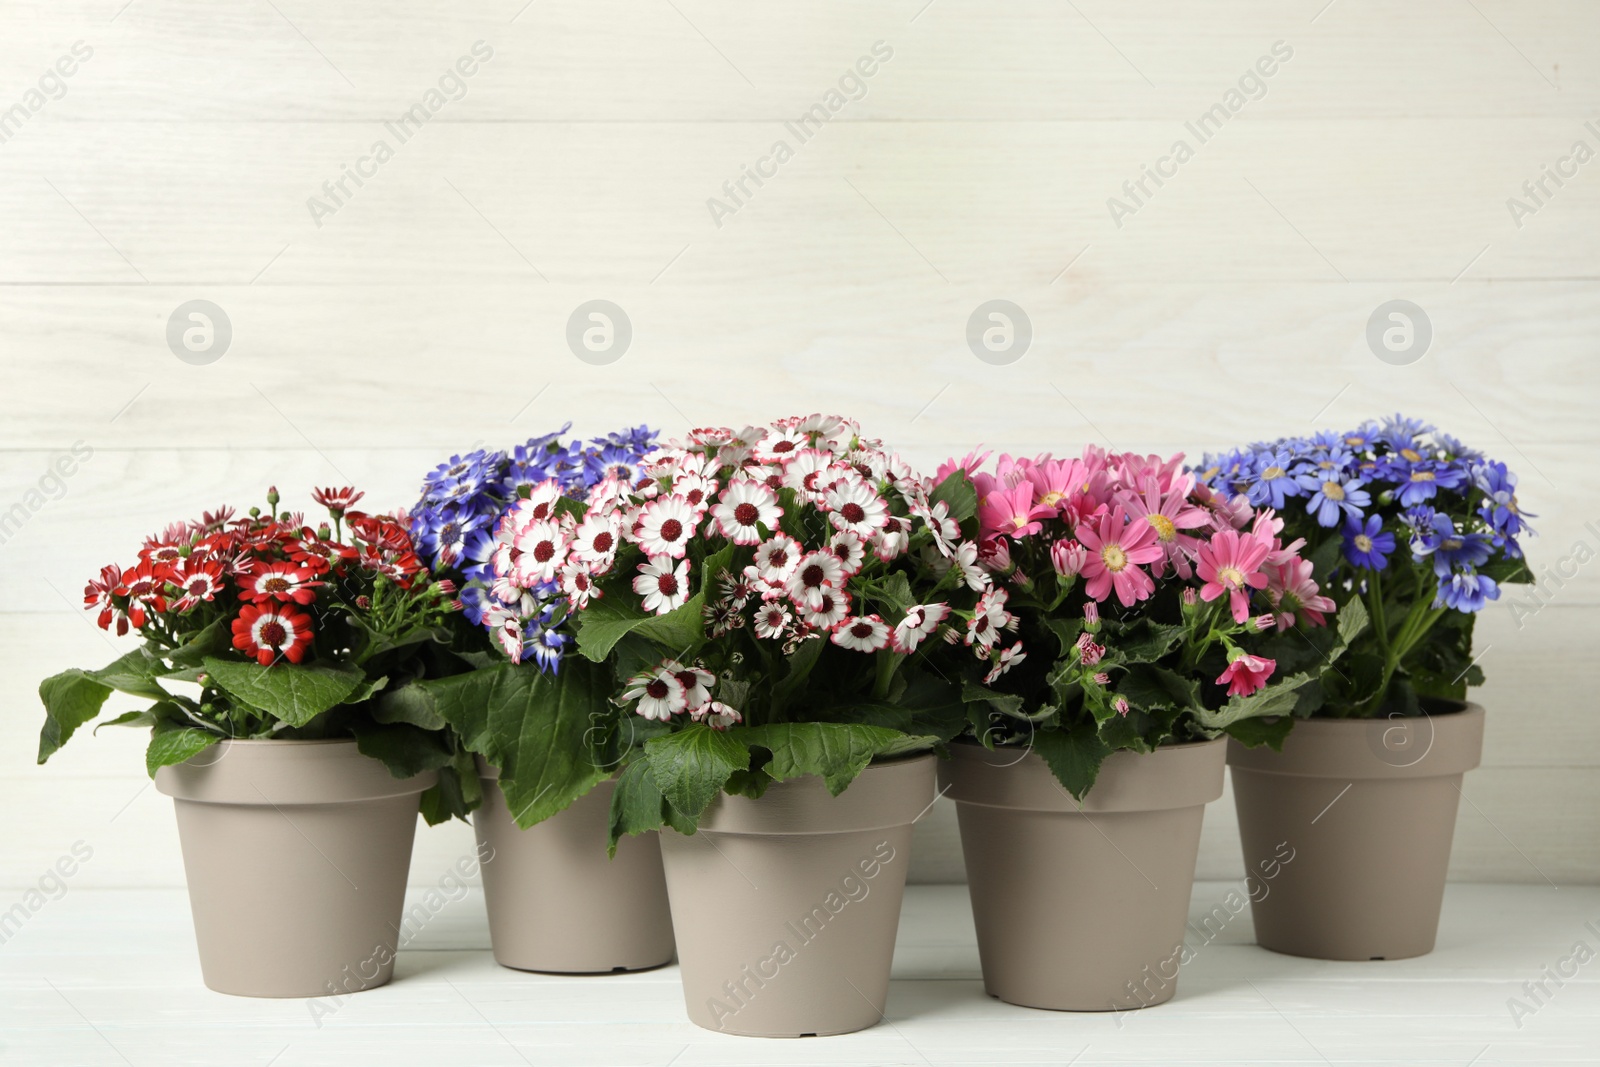 Photo of Different cineraria plants in flower pots on white table